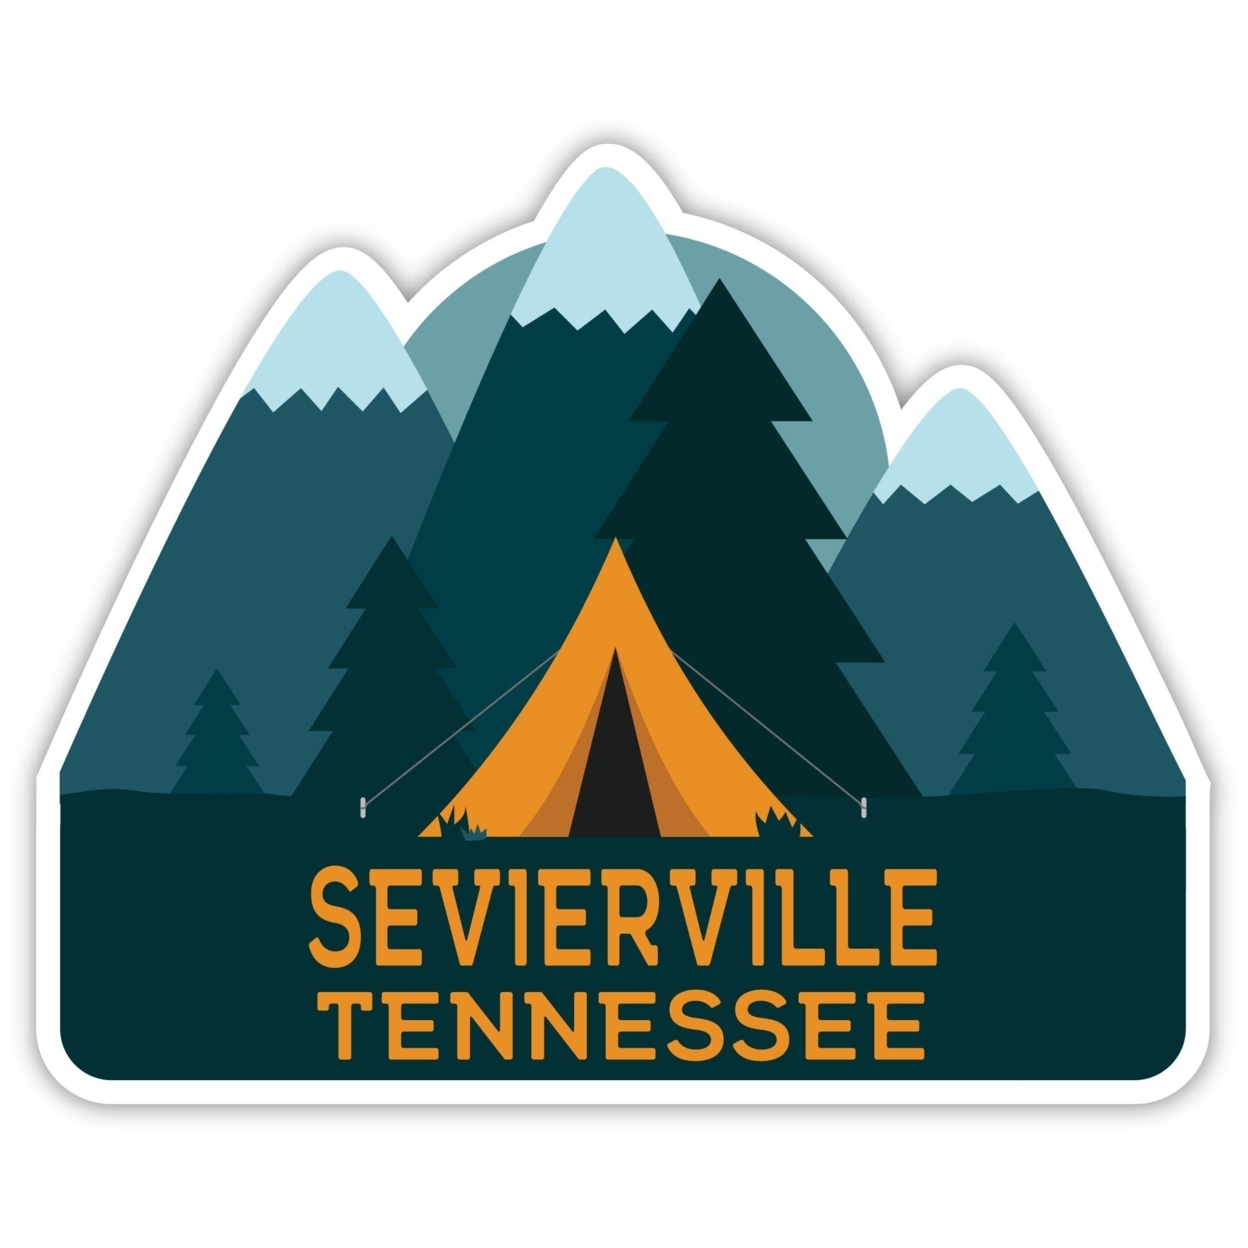 Sevierville Tennessee Souvenir Decorative Stickers (Choose Theme And Size) - Single Unit, 4-Inch, Great Outdoors